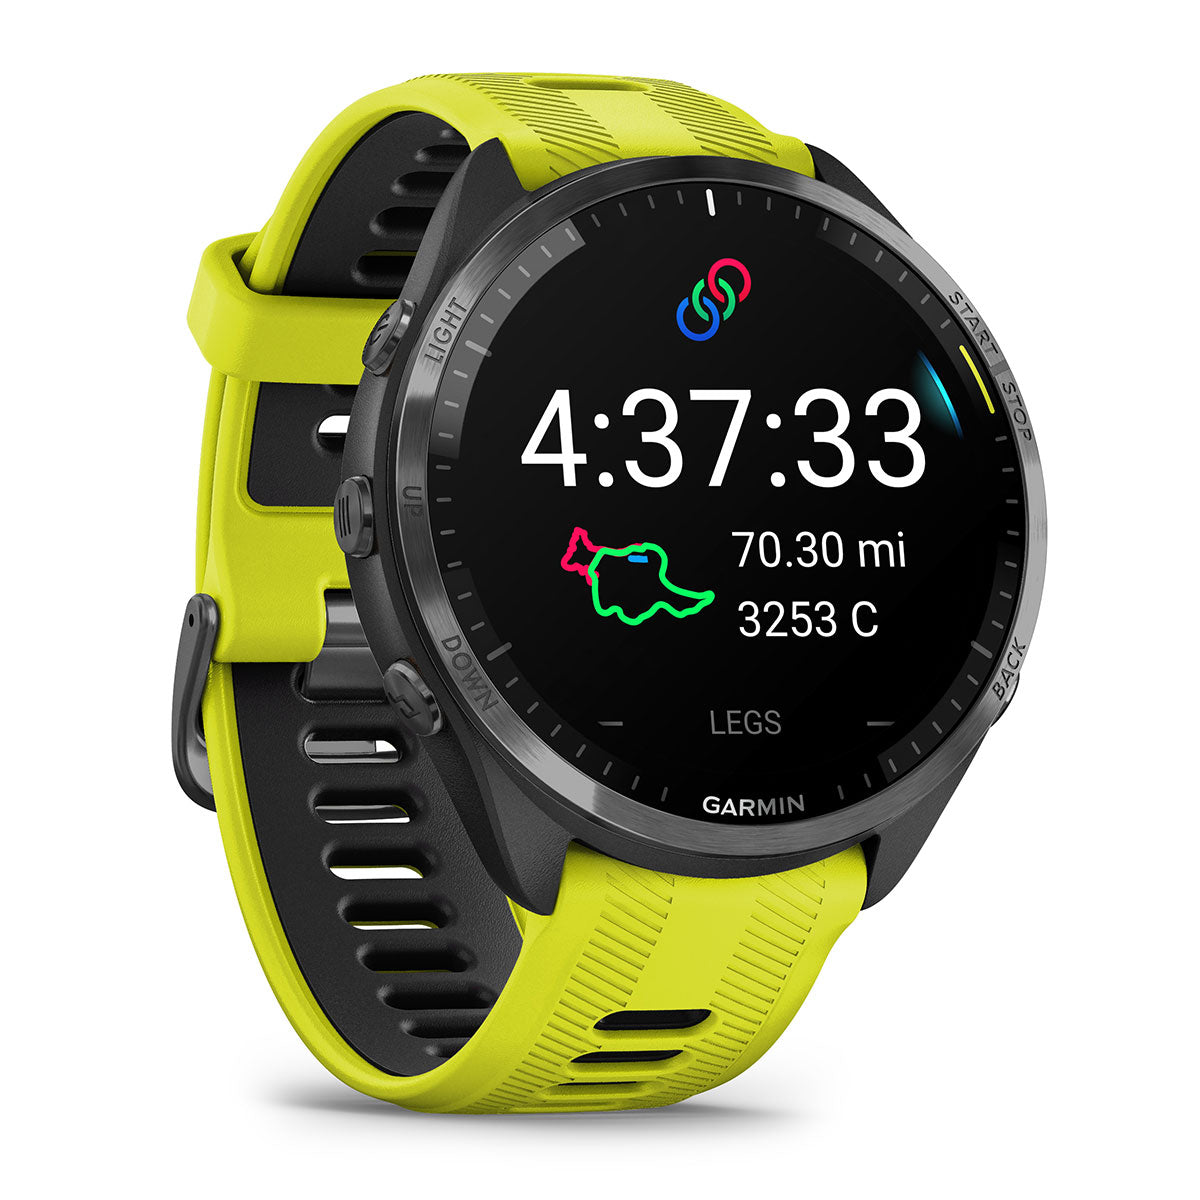 Garmin Forerunner 965 (Amp Yellow/Black) Premium Running GPS Smartwatch | Gift Box with PlayBetter HD Screen Protectors, Wall Adapter & Case - image 5 of 7